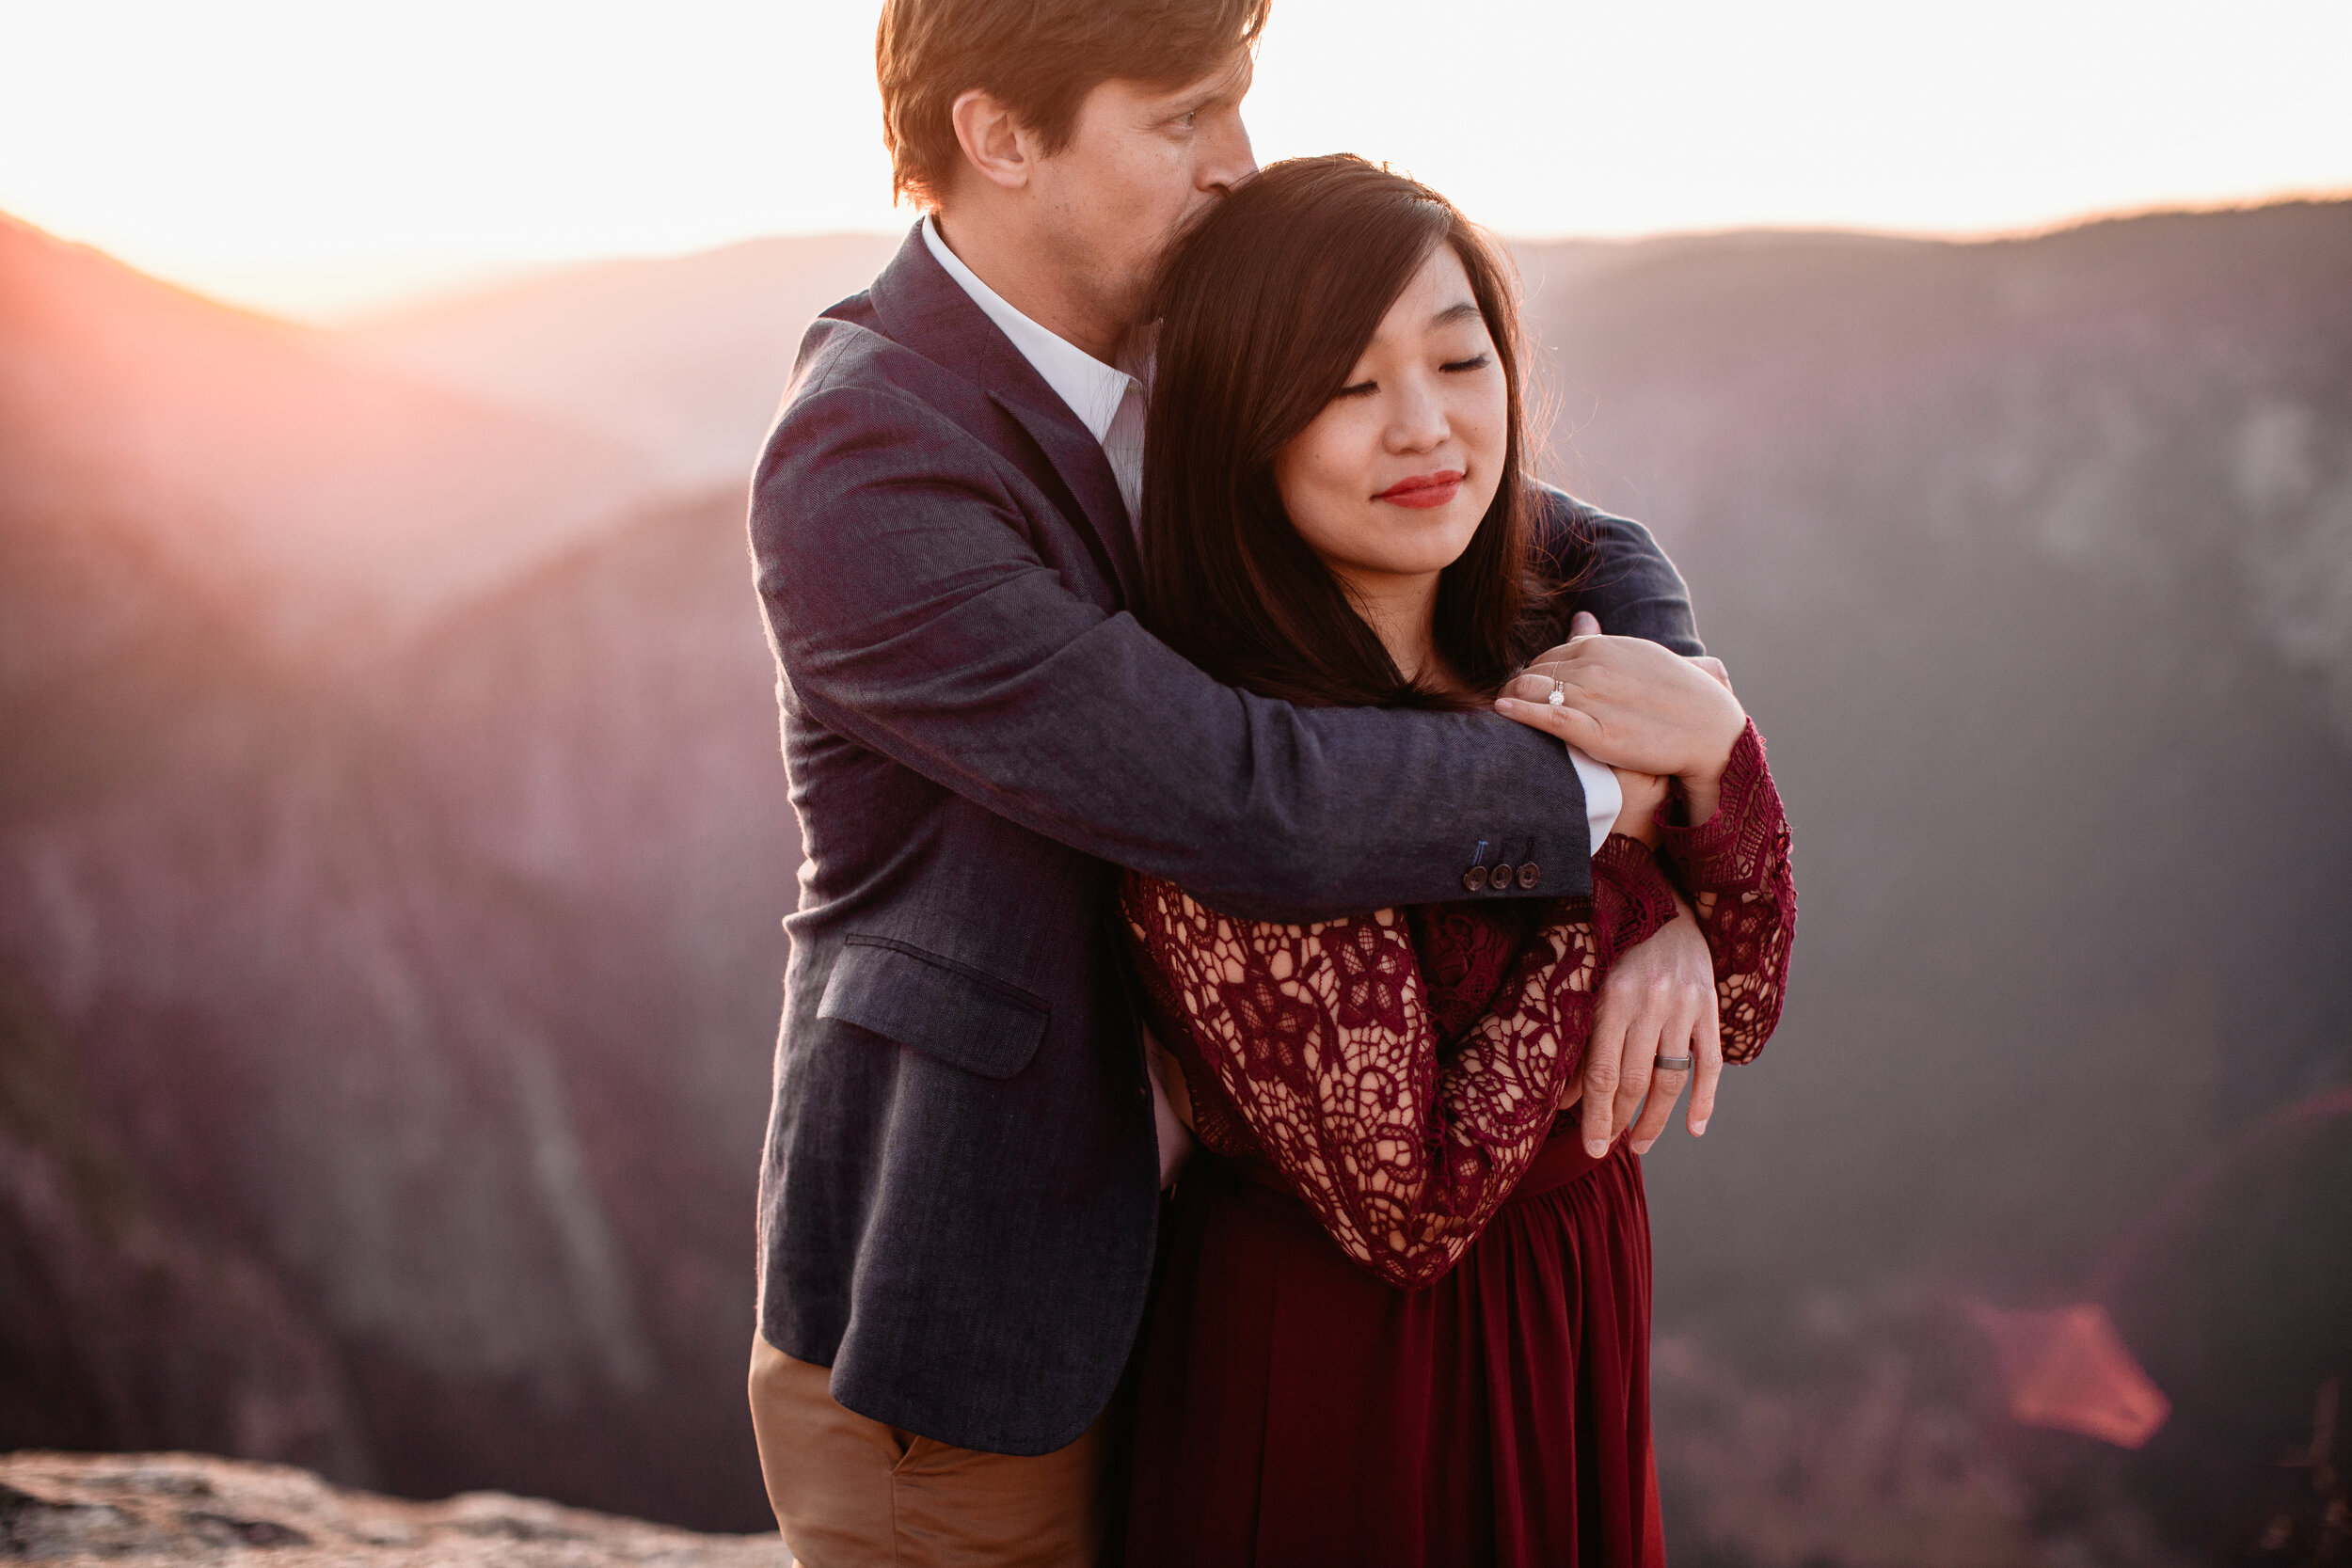 yosemite-national-park-couples-session-at-taft-point-and-yosemite-valley-yosemite-elopement-photographer-nicole-daacke-photography-166.jpg